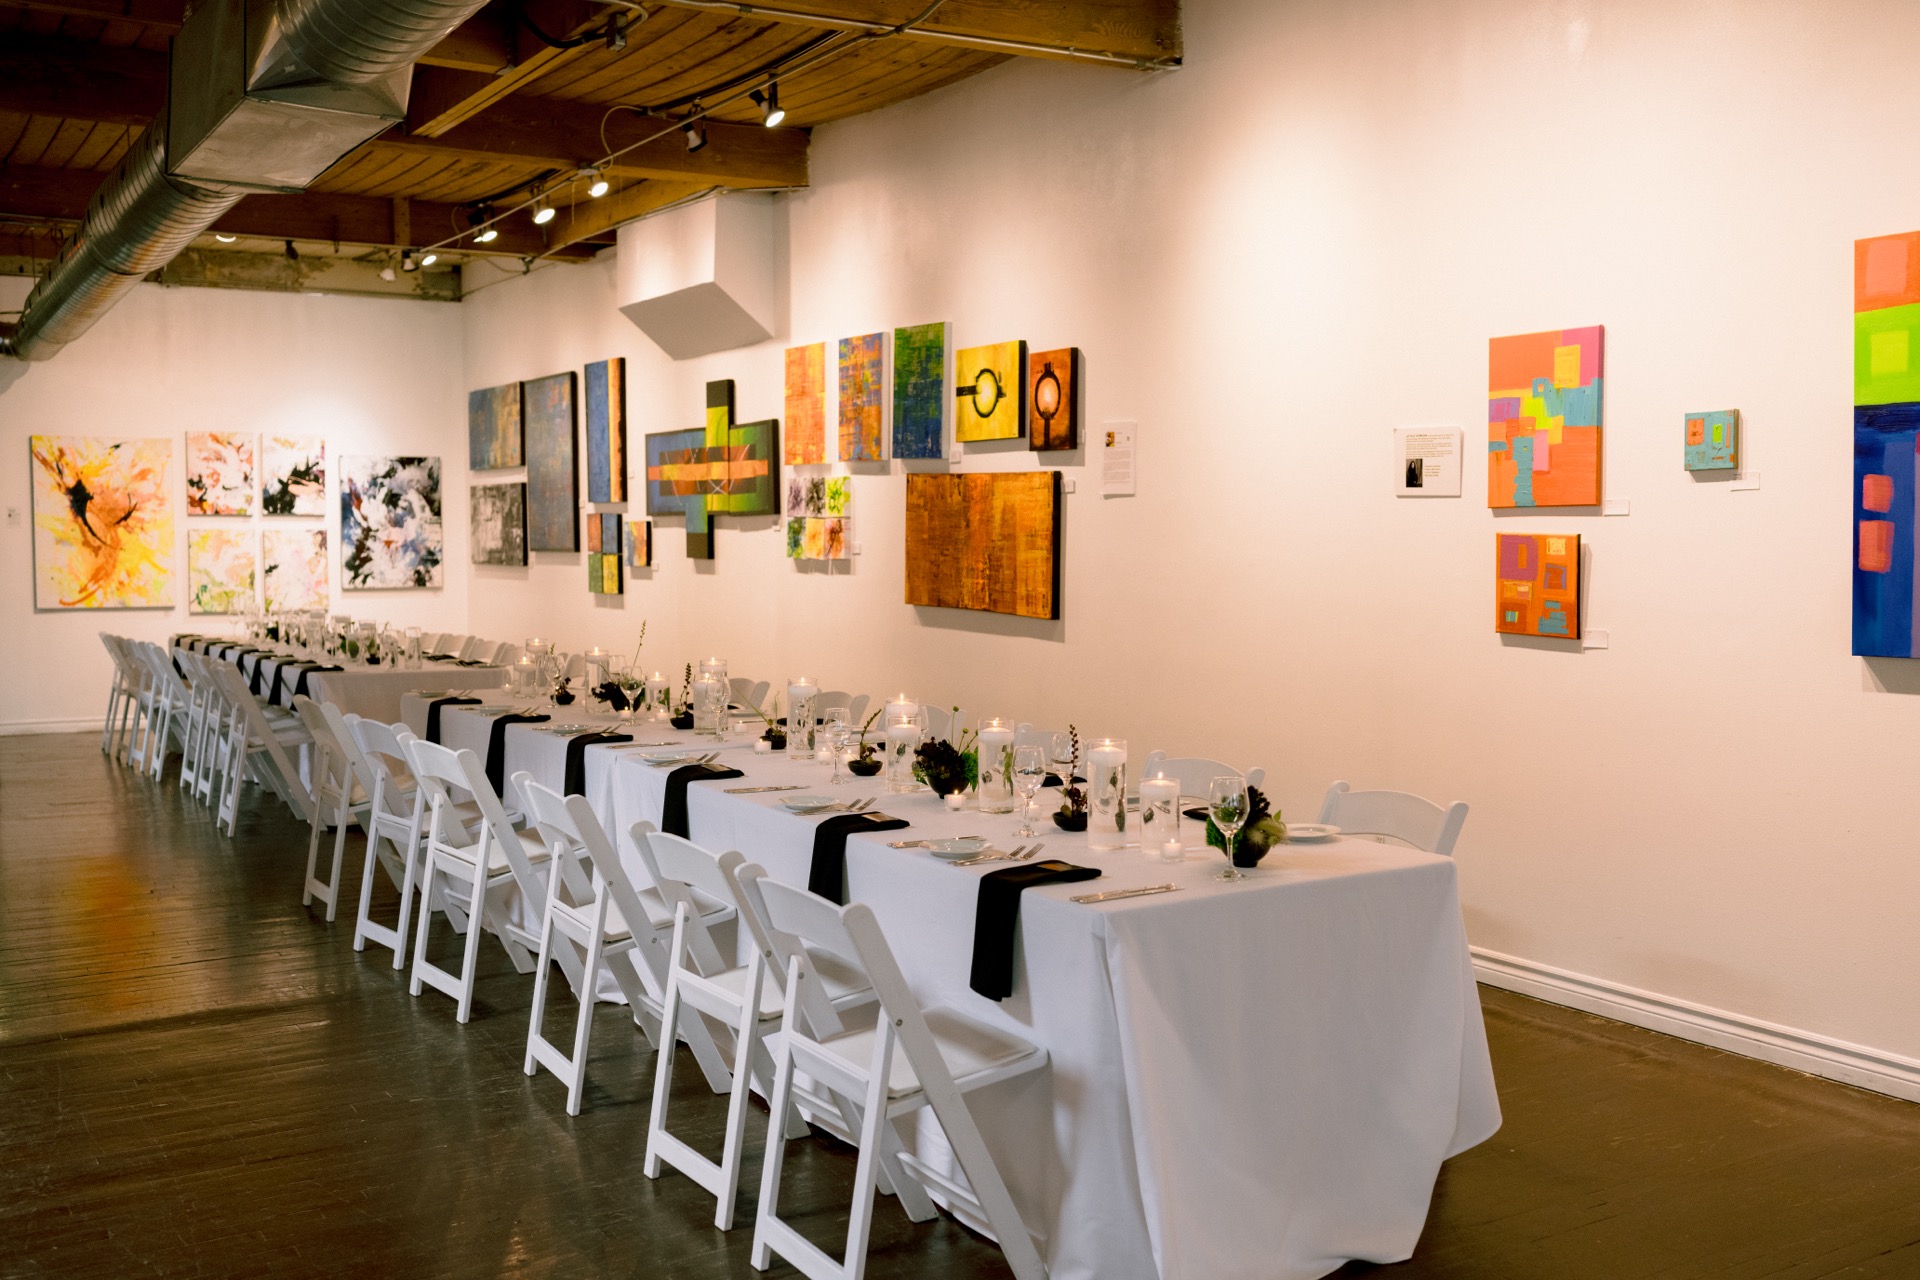 An elegantly set dinner table in an art gallery with paintings displayed on the wall.